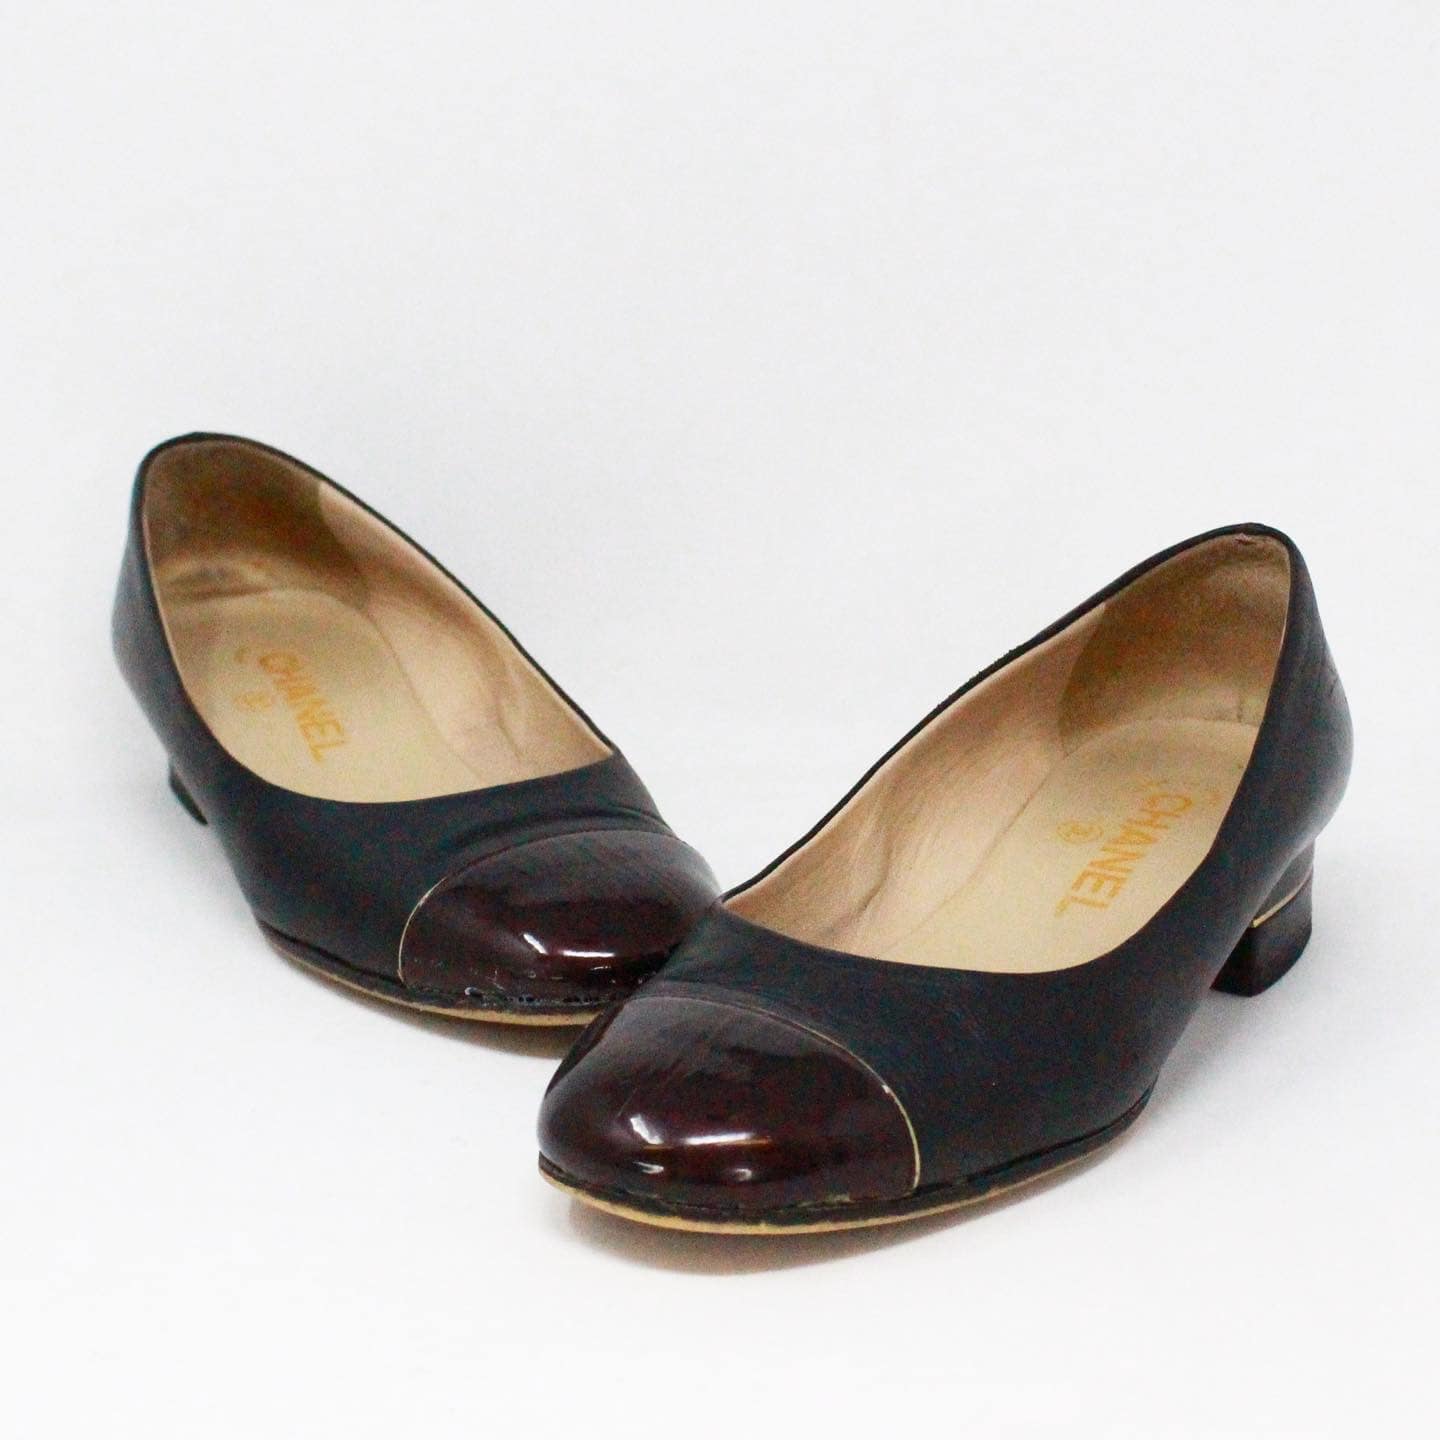 CHANEL #38037 Bicolor Black and Wine Patent Leather Heel Flats (US